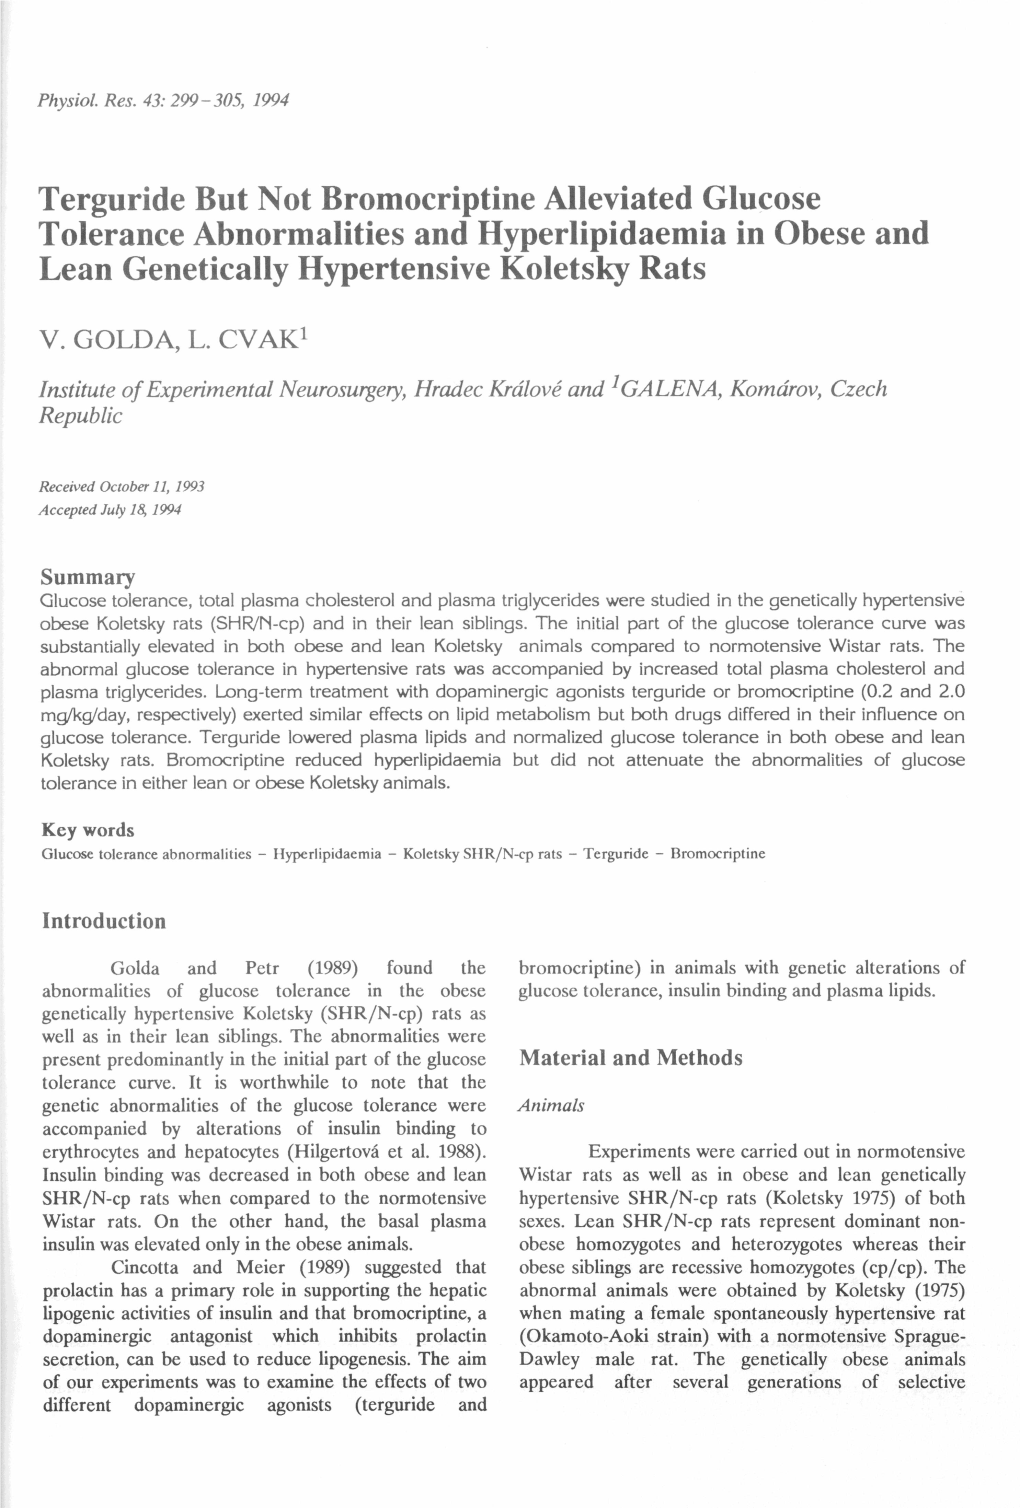 Terguride but Not Bromocriptine Alleviated Glucose Tolerance Abnormalities and Hyperlipidaemia in Obese and Lean Genetically Hypertensive Koletsky Rats